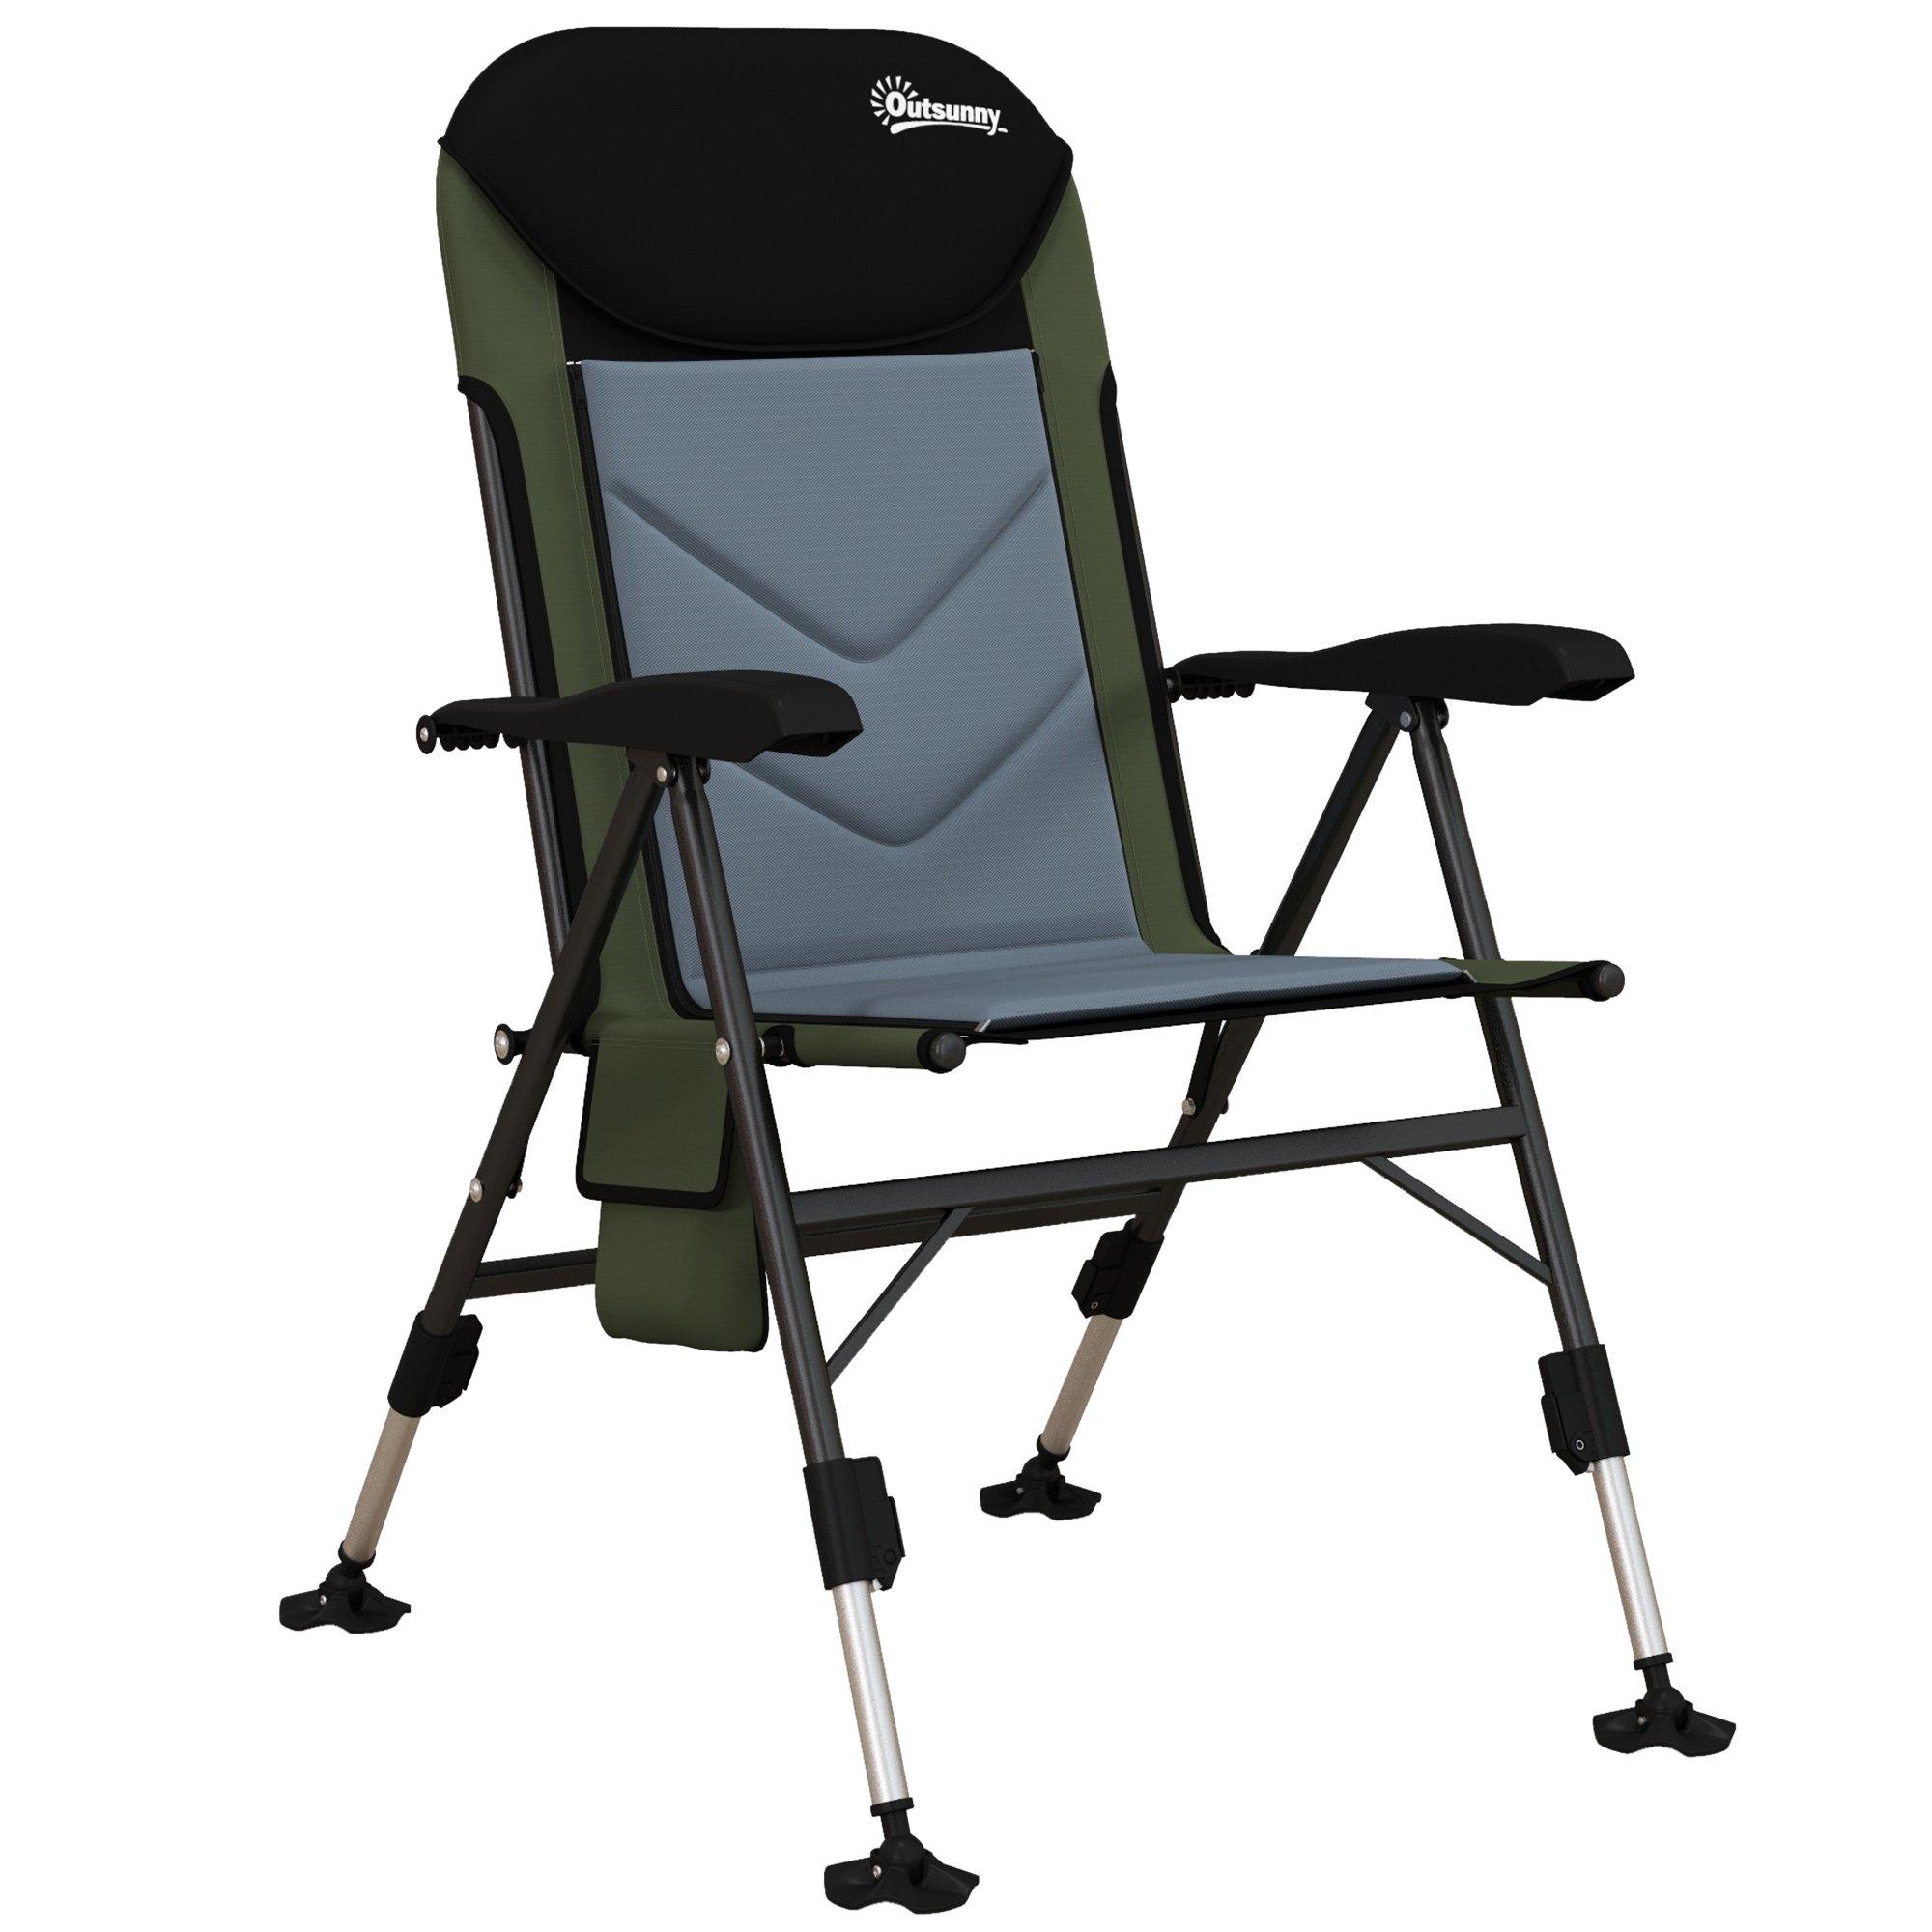 Portable Fishing Chair with Reclining Backrest Adjustable Legs and Mud Feet